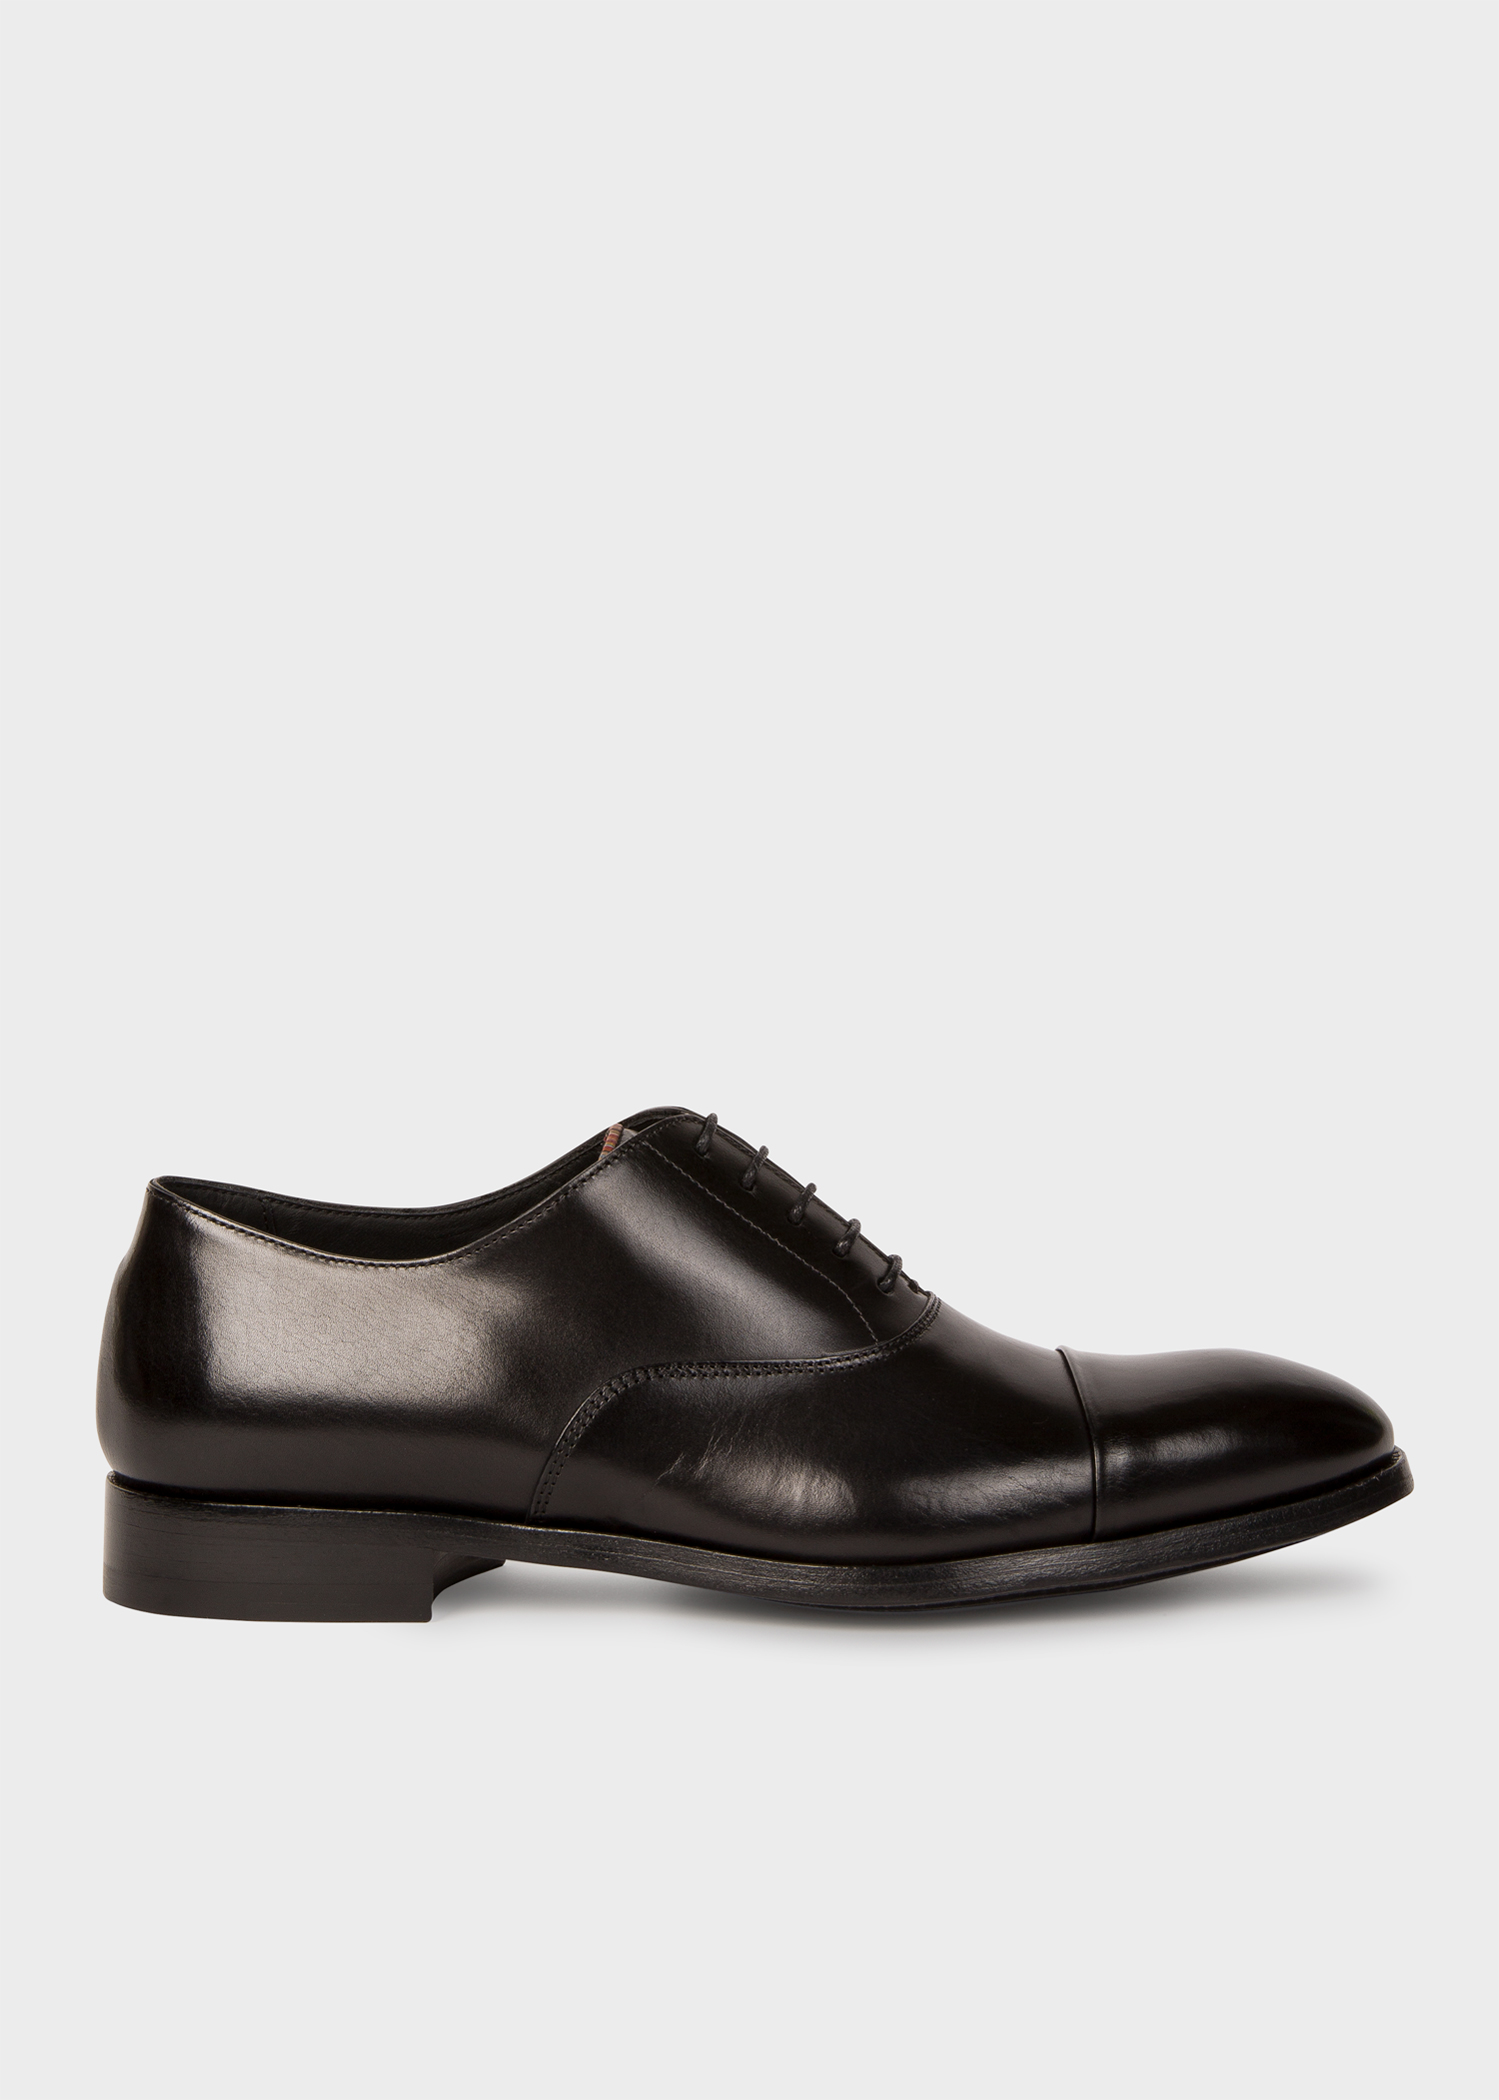 Side View - Men's Black Leather 'Brent' Oxford Shoes With 'Signature Stripe' Details Paul Smith